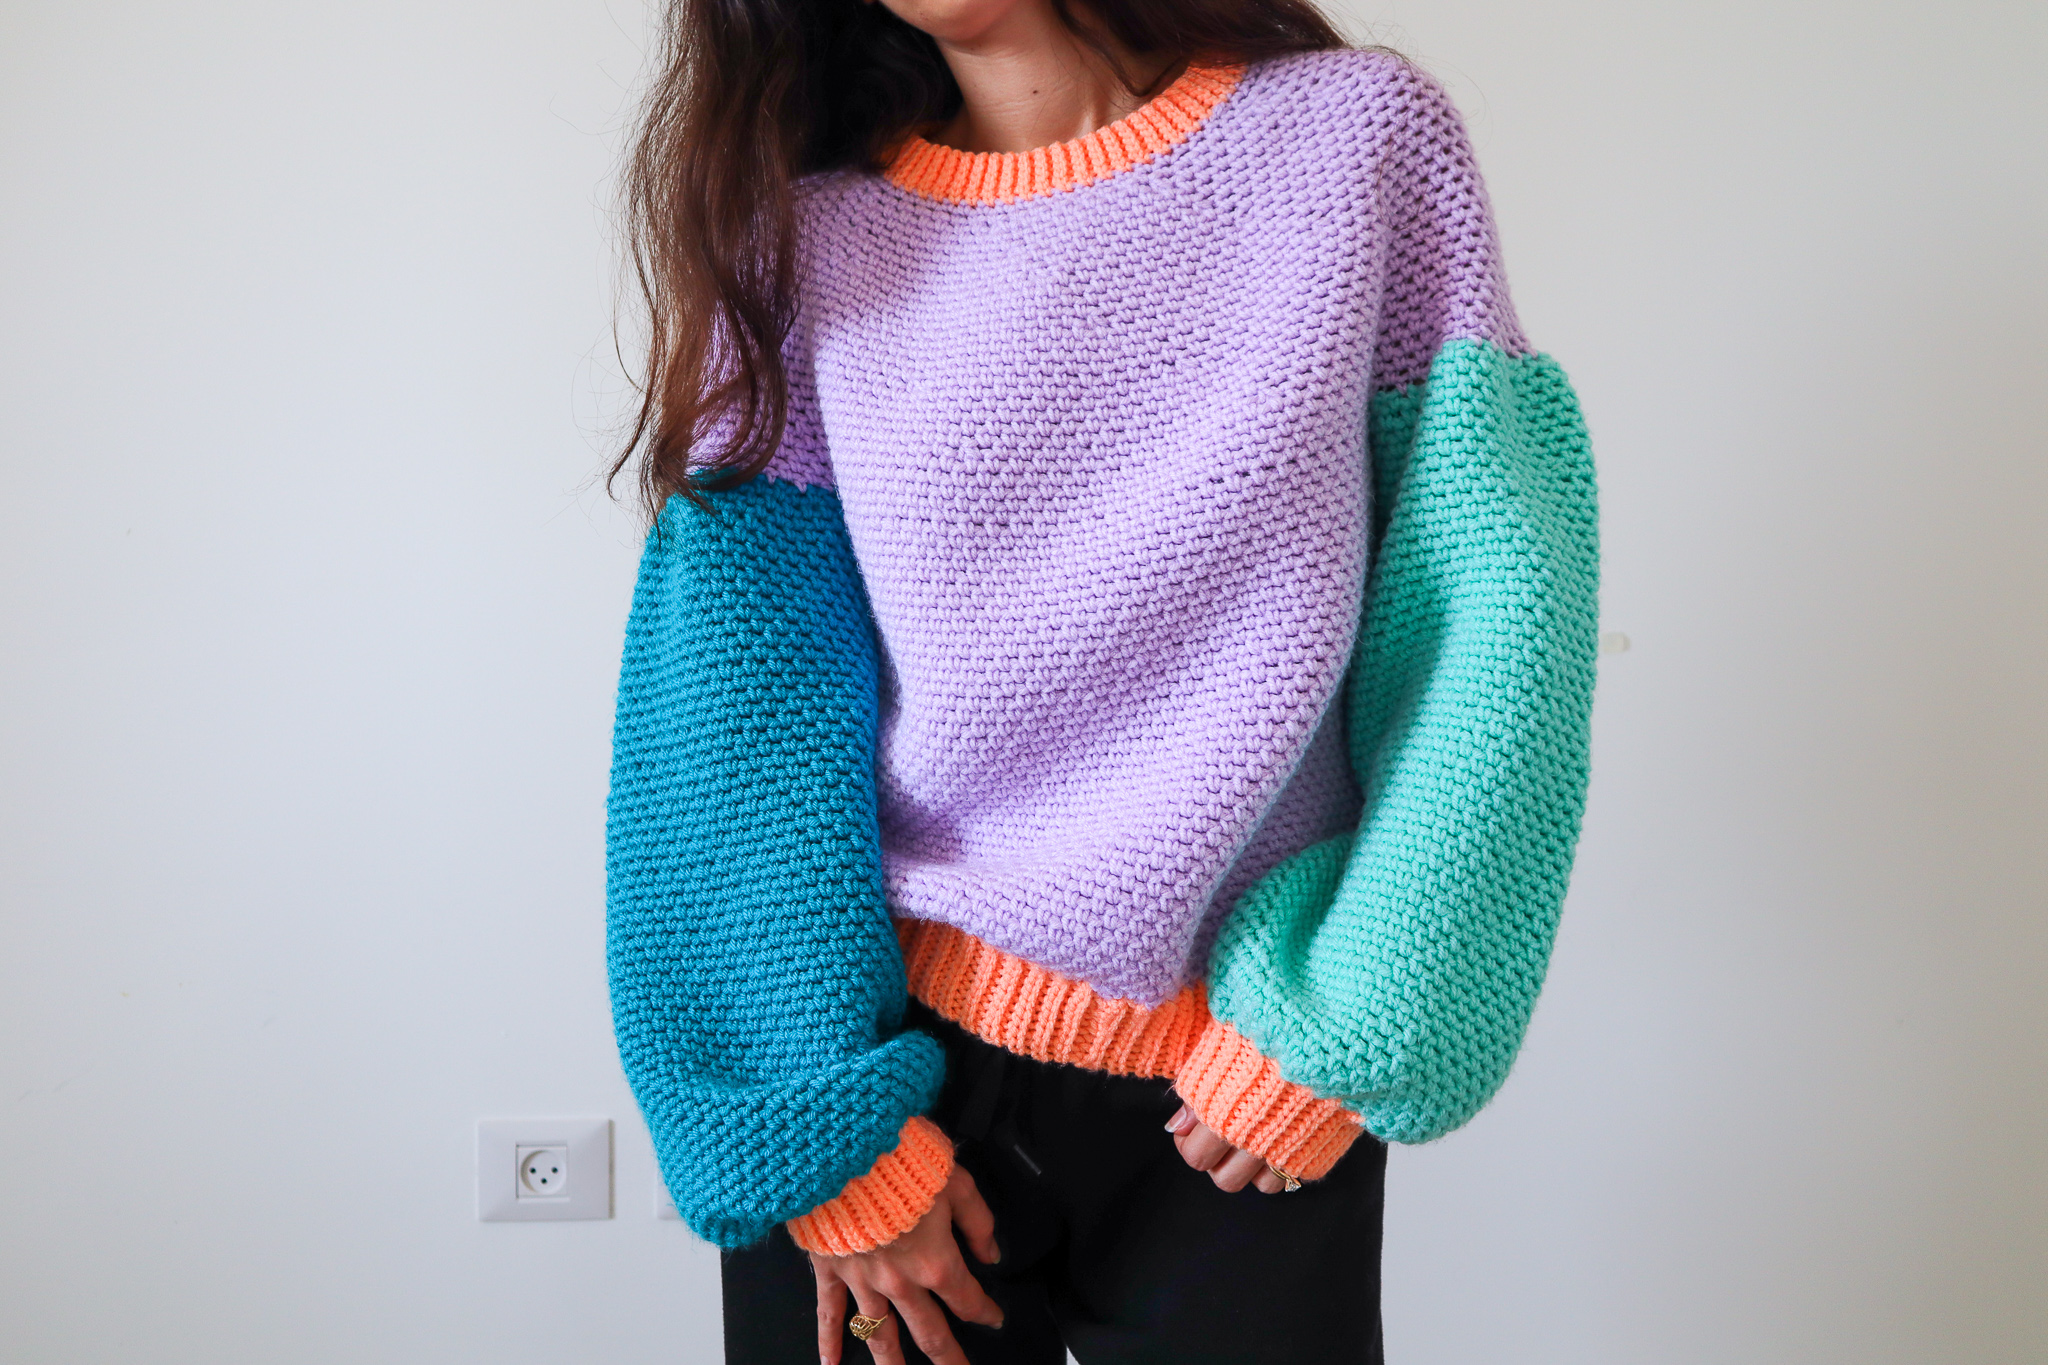 The Better Sweater – Worsted Crochet Sweater Pattern – The Snugglery